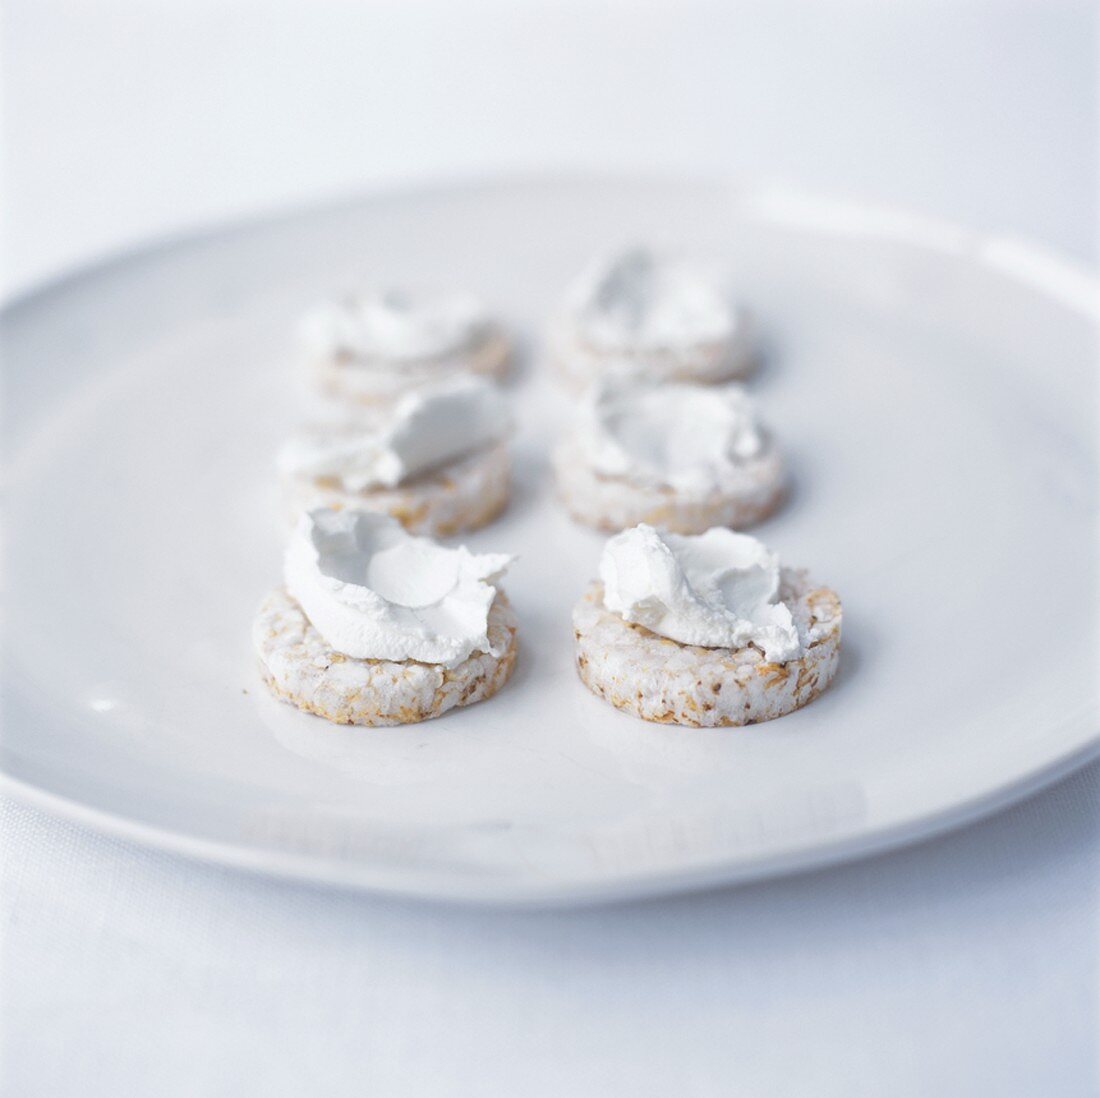 6 rice cakes spread with soft cheese on white plate